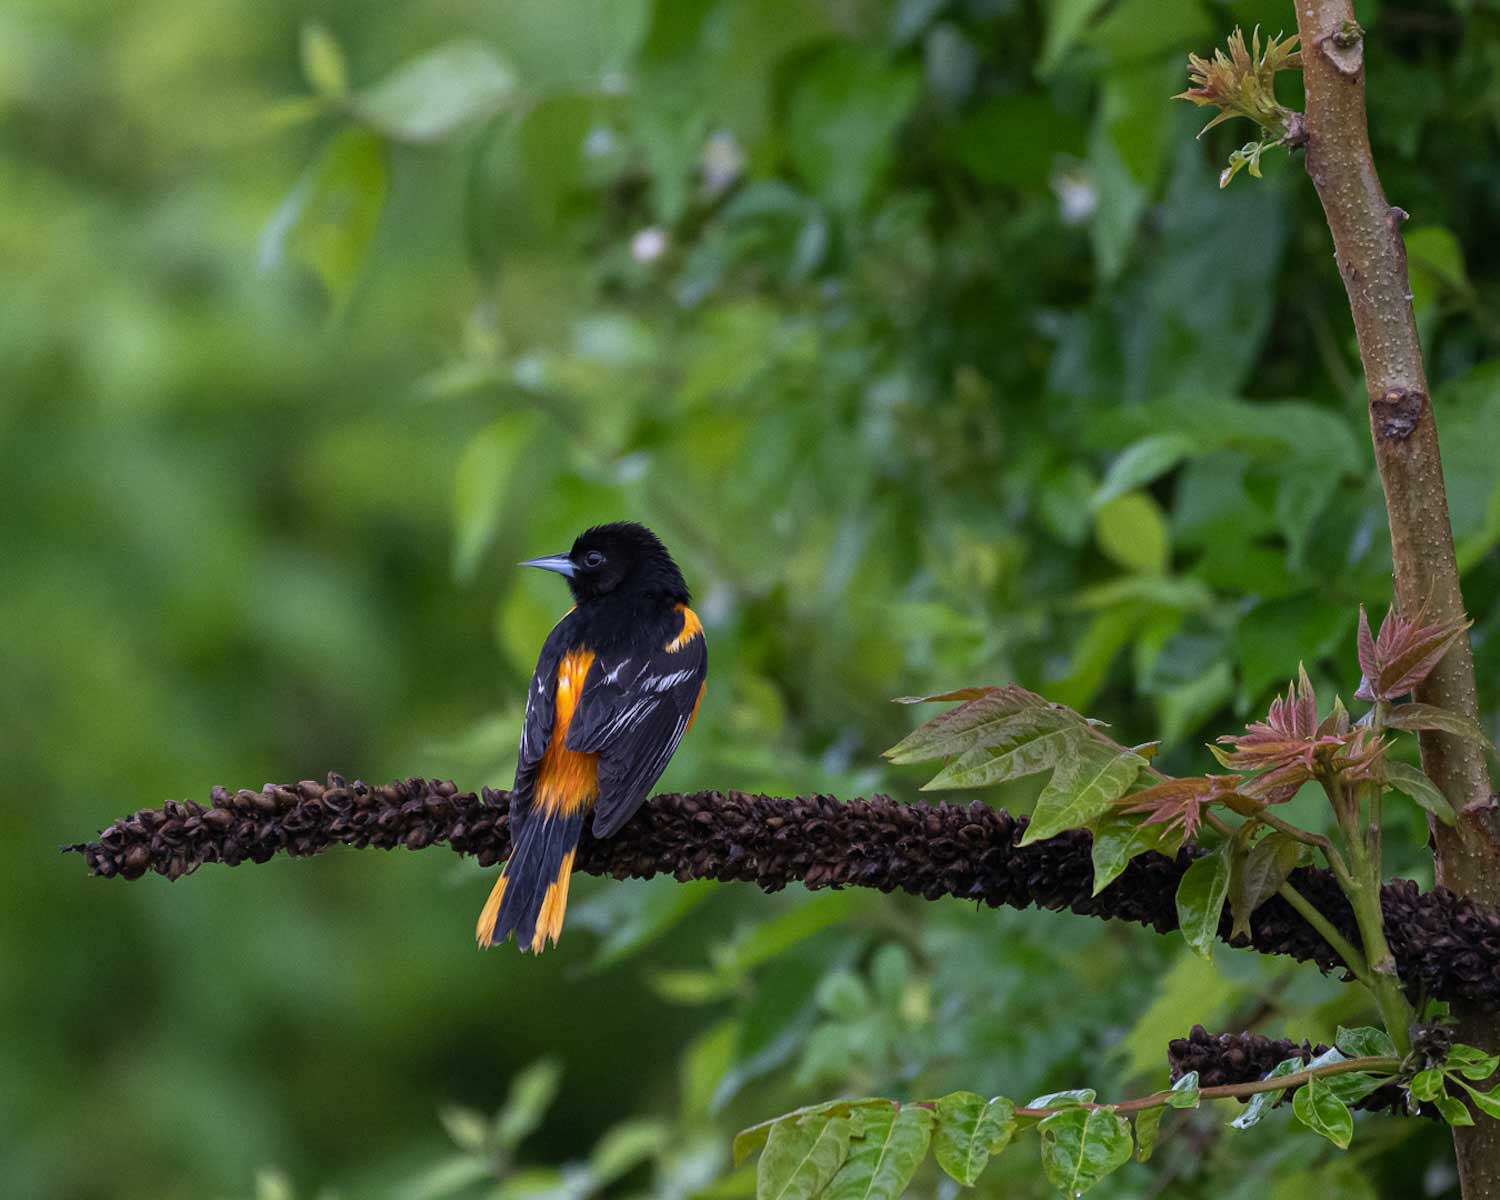 A Baltimore oriole perched on a branch.